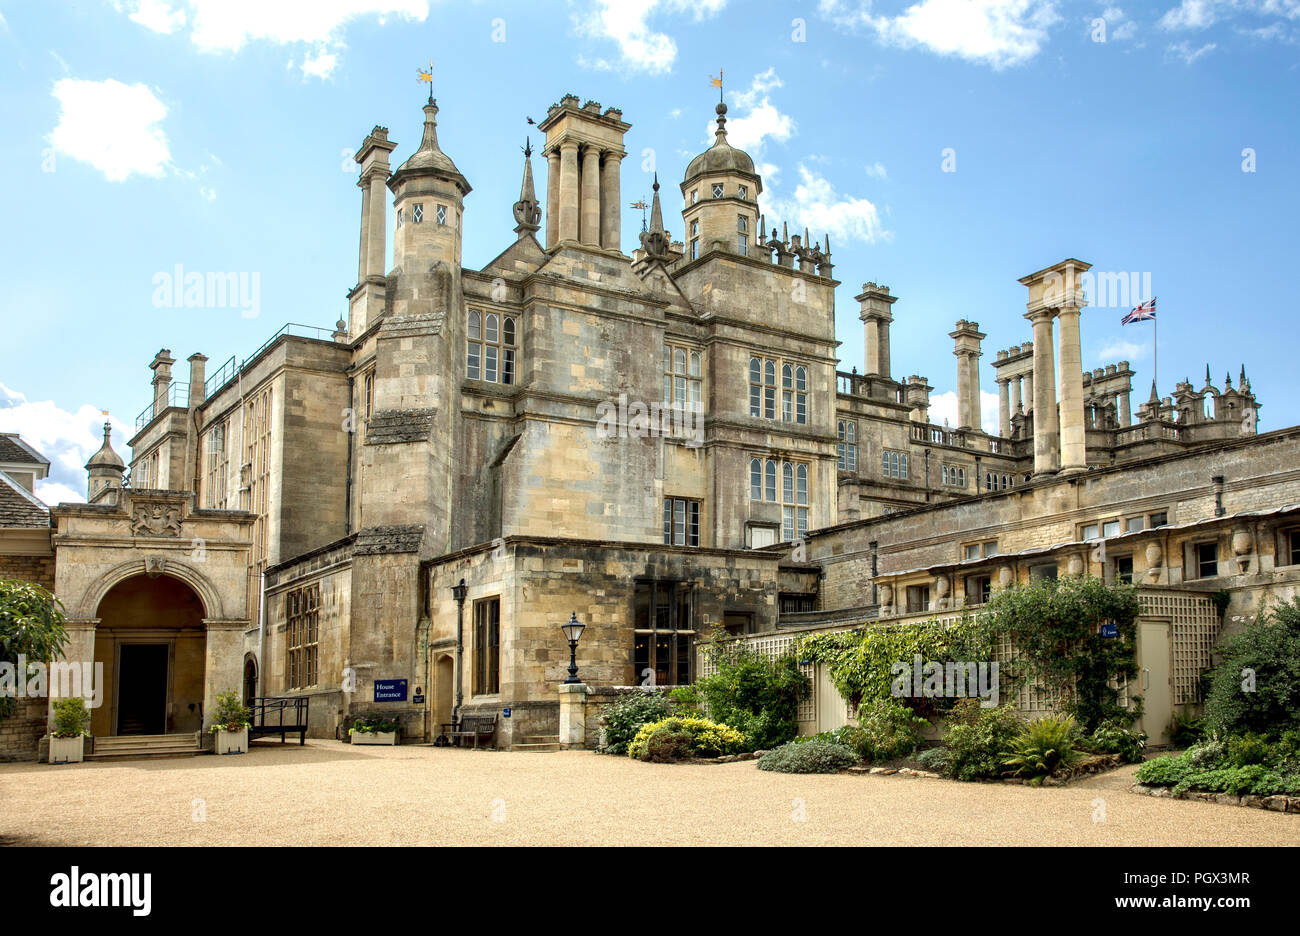 Burghley House is a grand sixteenth-century country house, Stamford, Lincolnshire, England Home to William Cecil, the first Lord Burghley Stock Photo